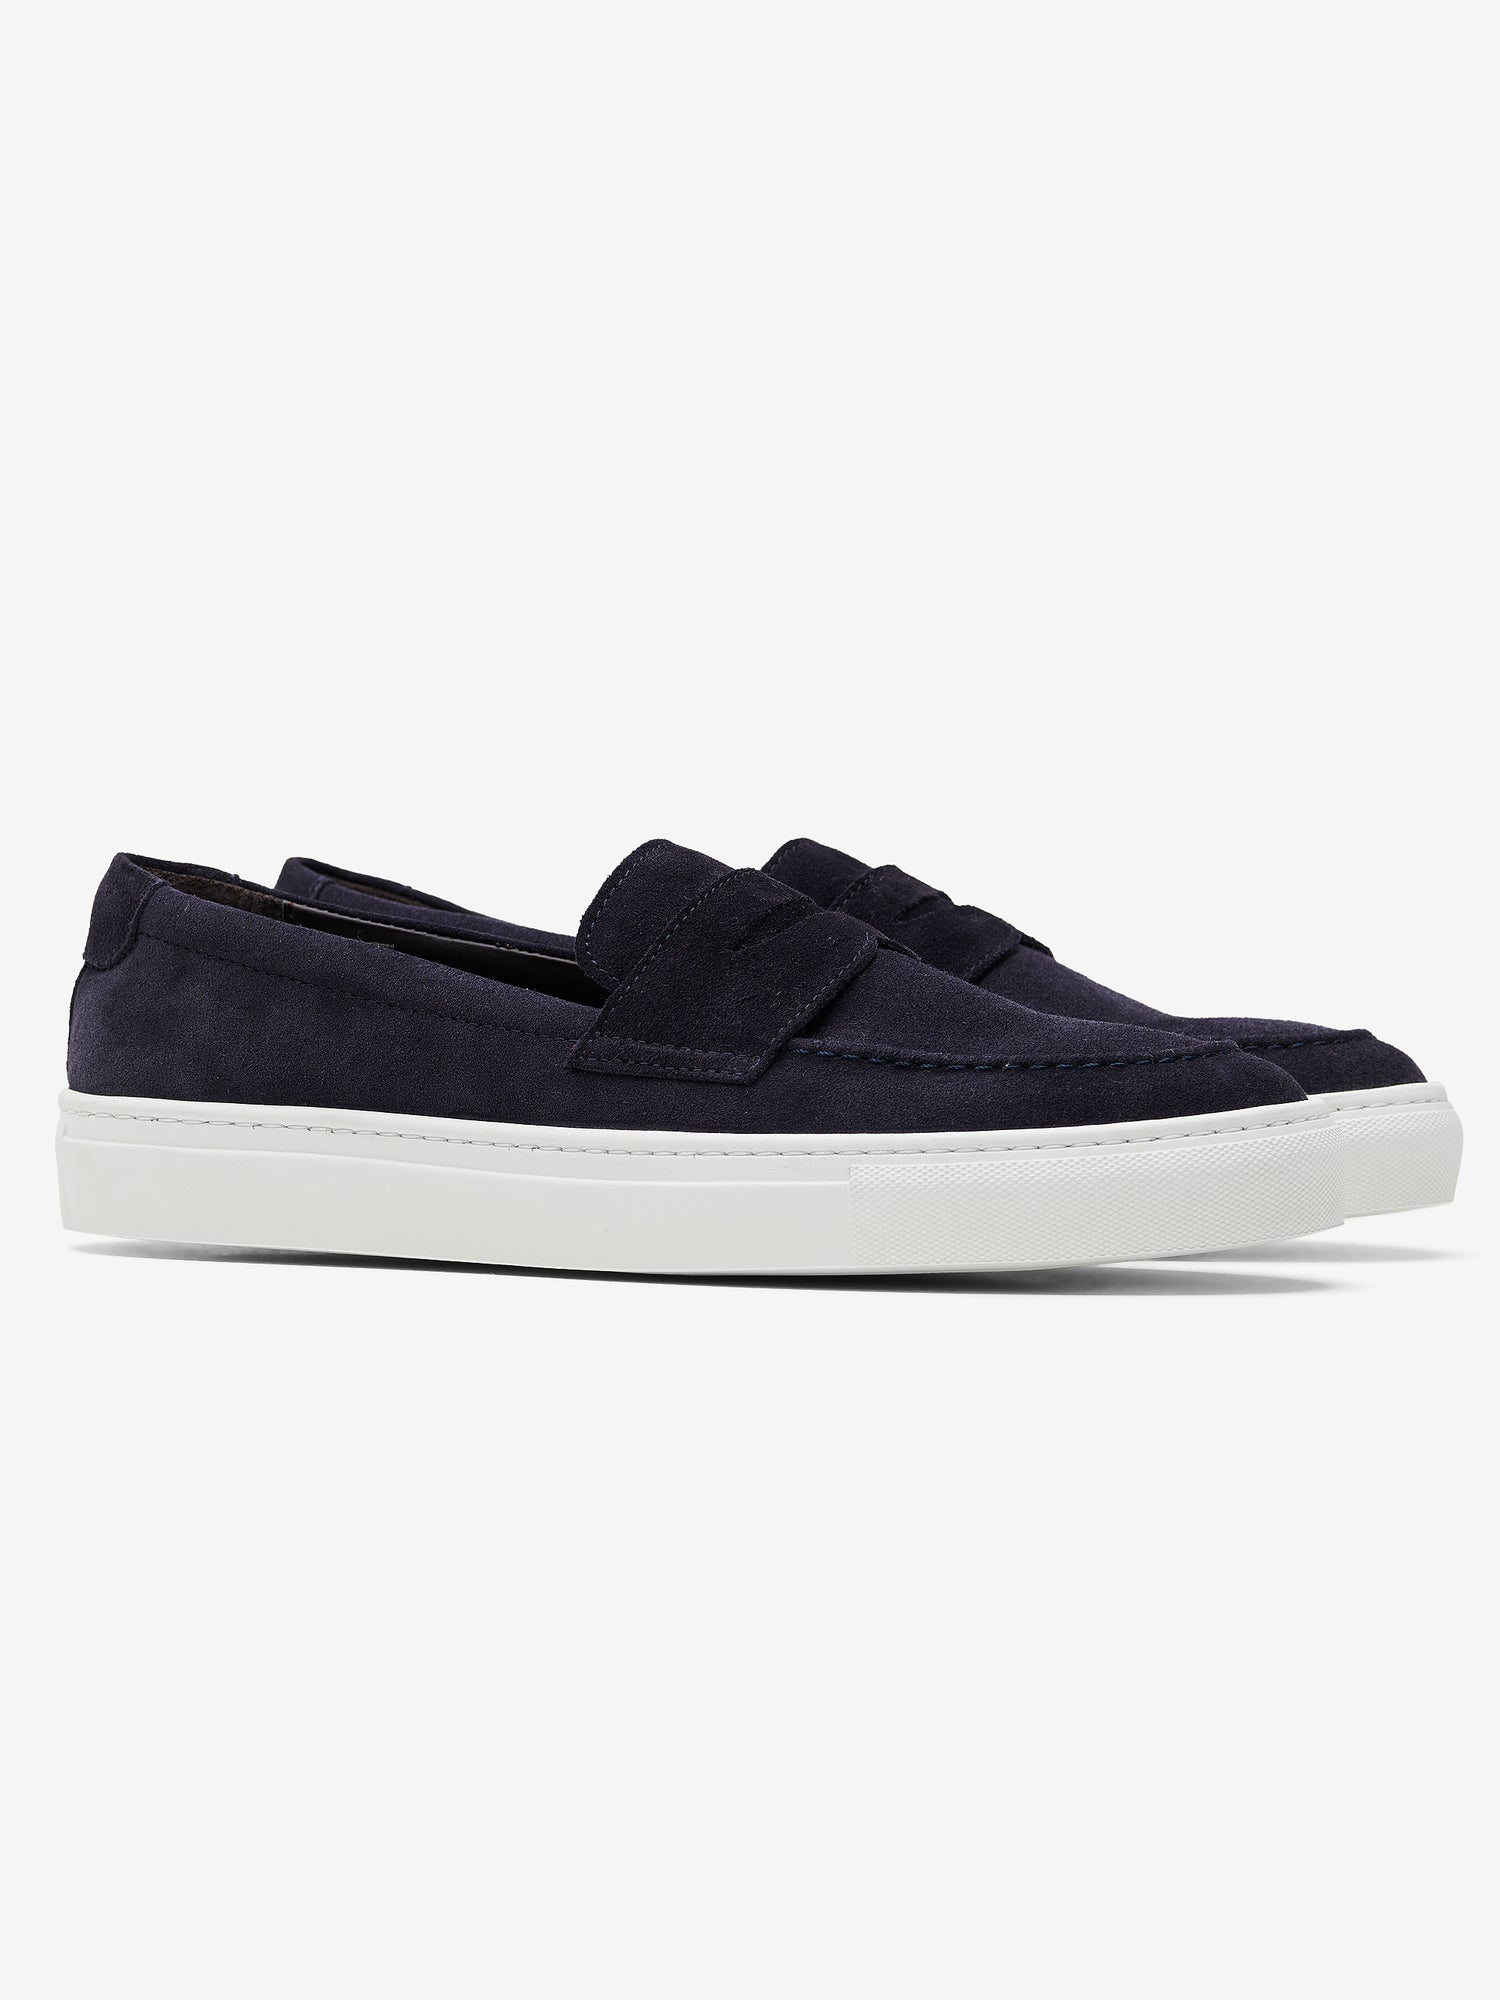 Melbourne Suede FW10072-NVY